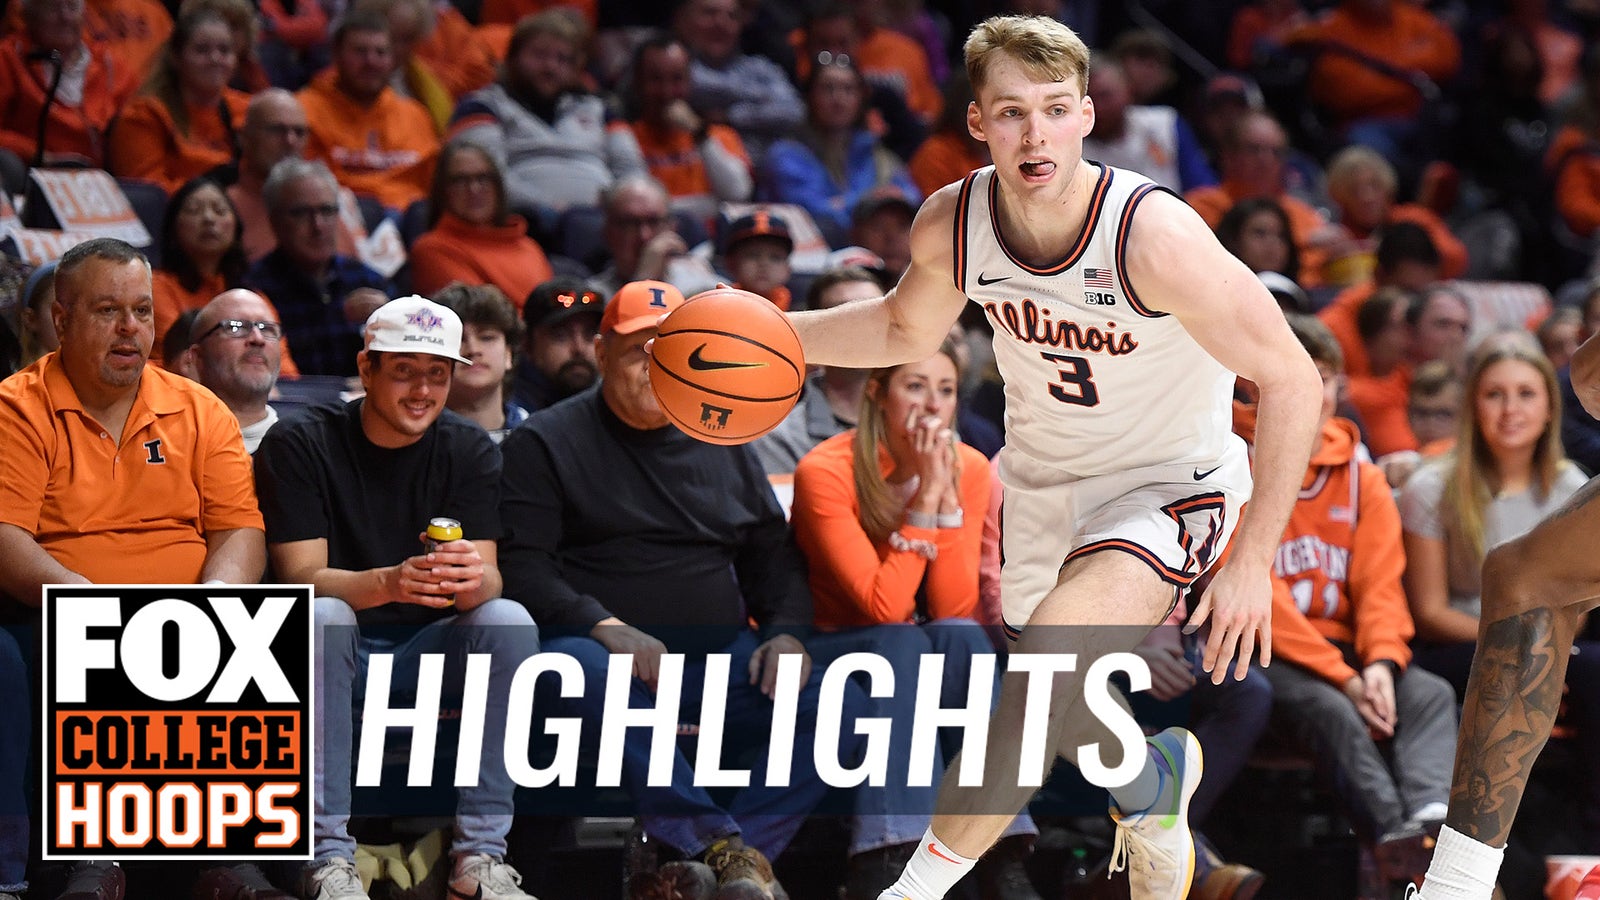 Marcus Domask drops 16 points & 10 rebounds in Illinois' victory over Indiana